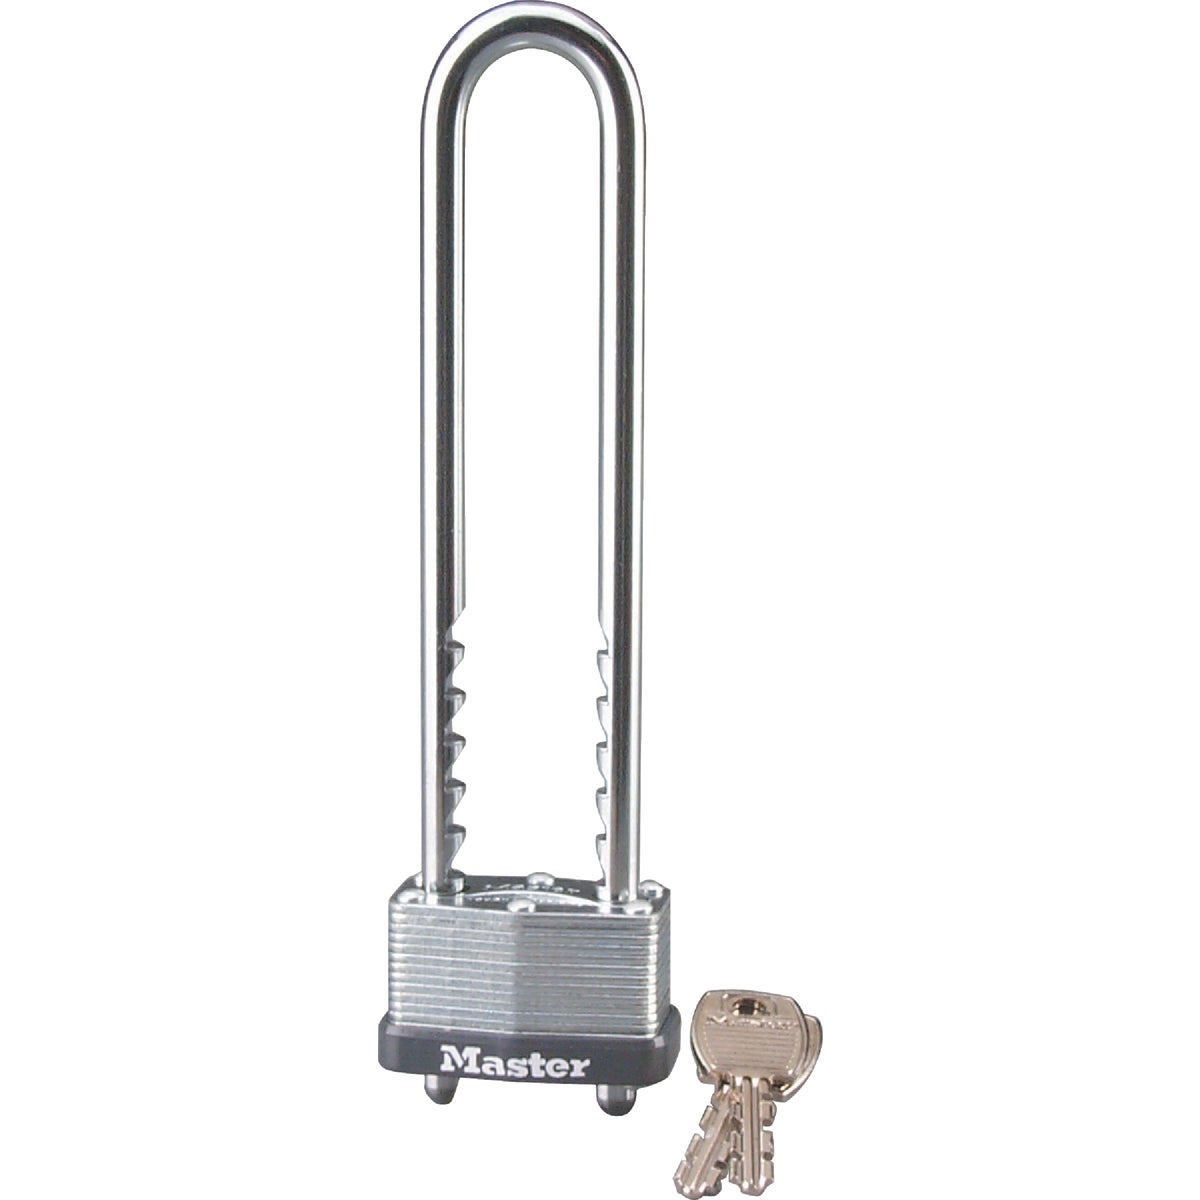 Master Lock 1-3/4 In. W. Warded Keyed Different Padlock with 2-3/4 In. To 5-3/8 In. Adjustable Shackle